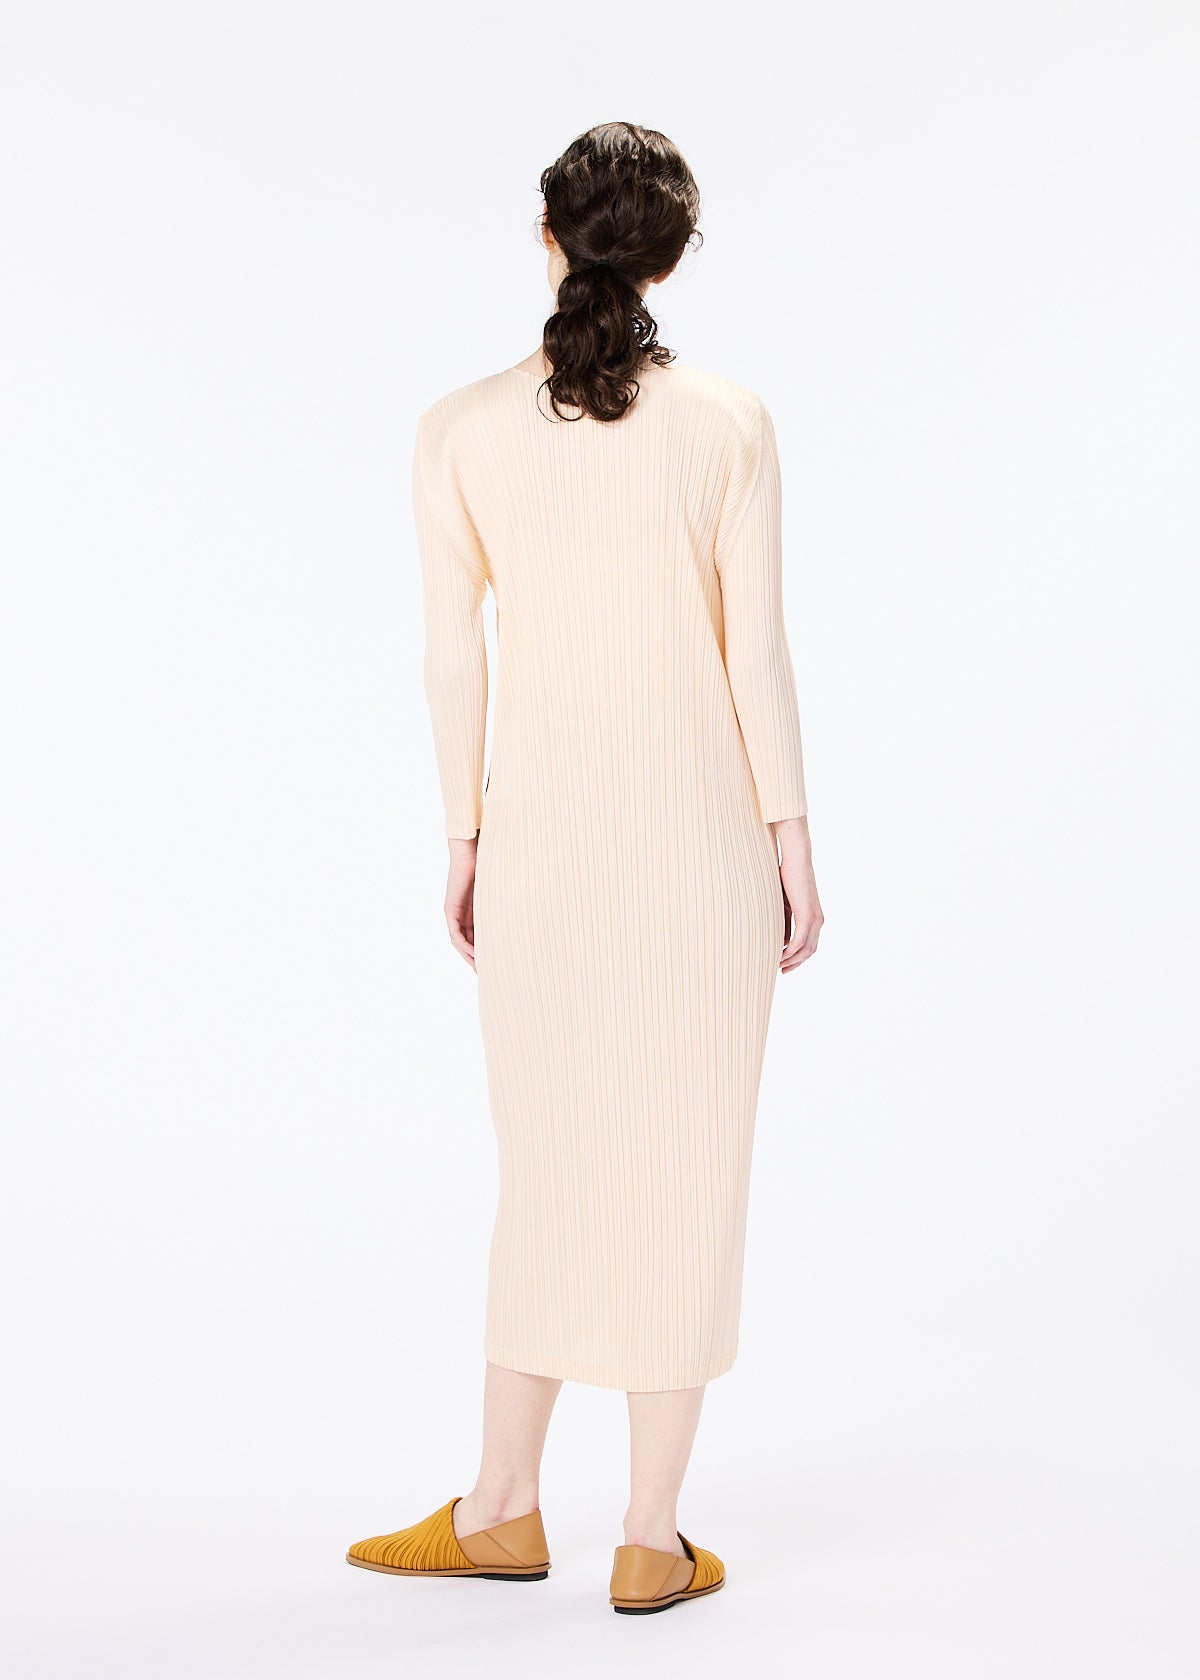 MONTHLY COLORS : FEBRUARY DRESS | The official ISSEY MIYAKE ONLINE 